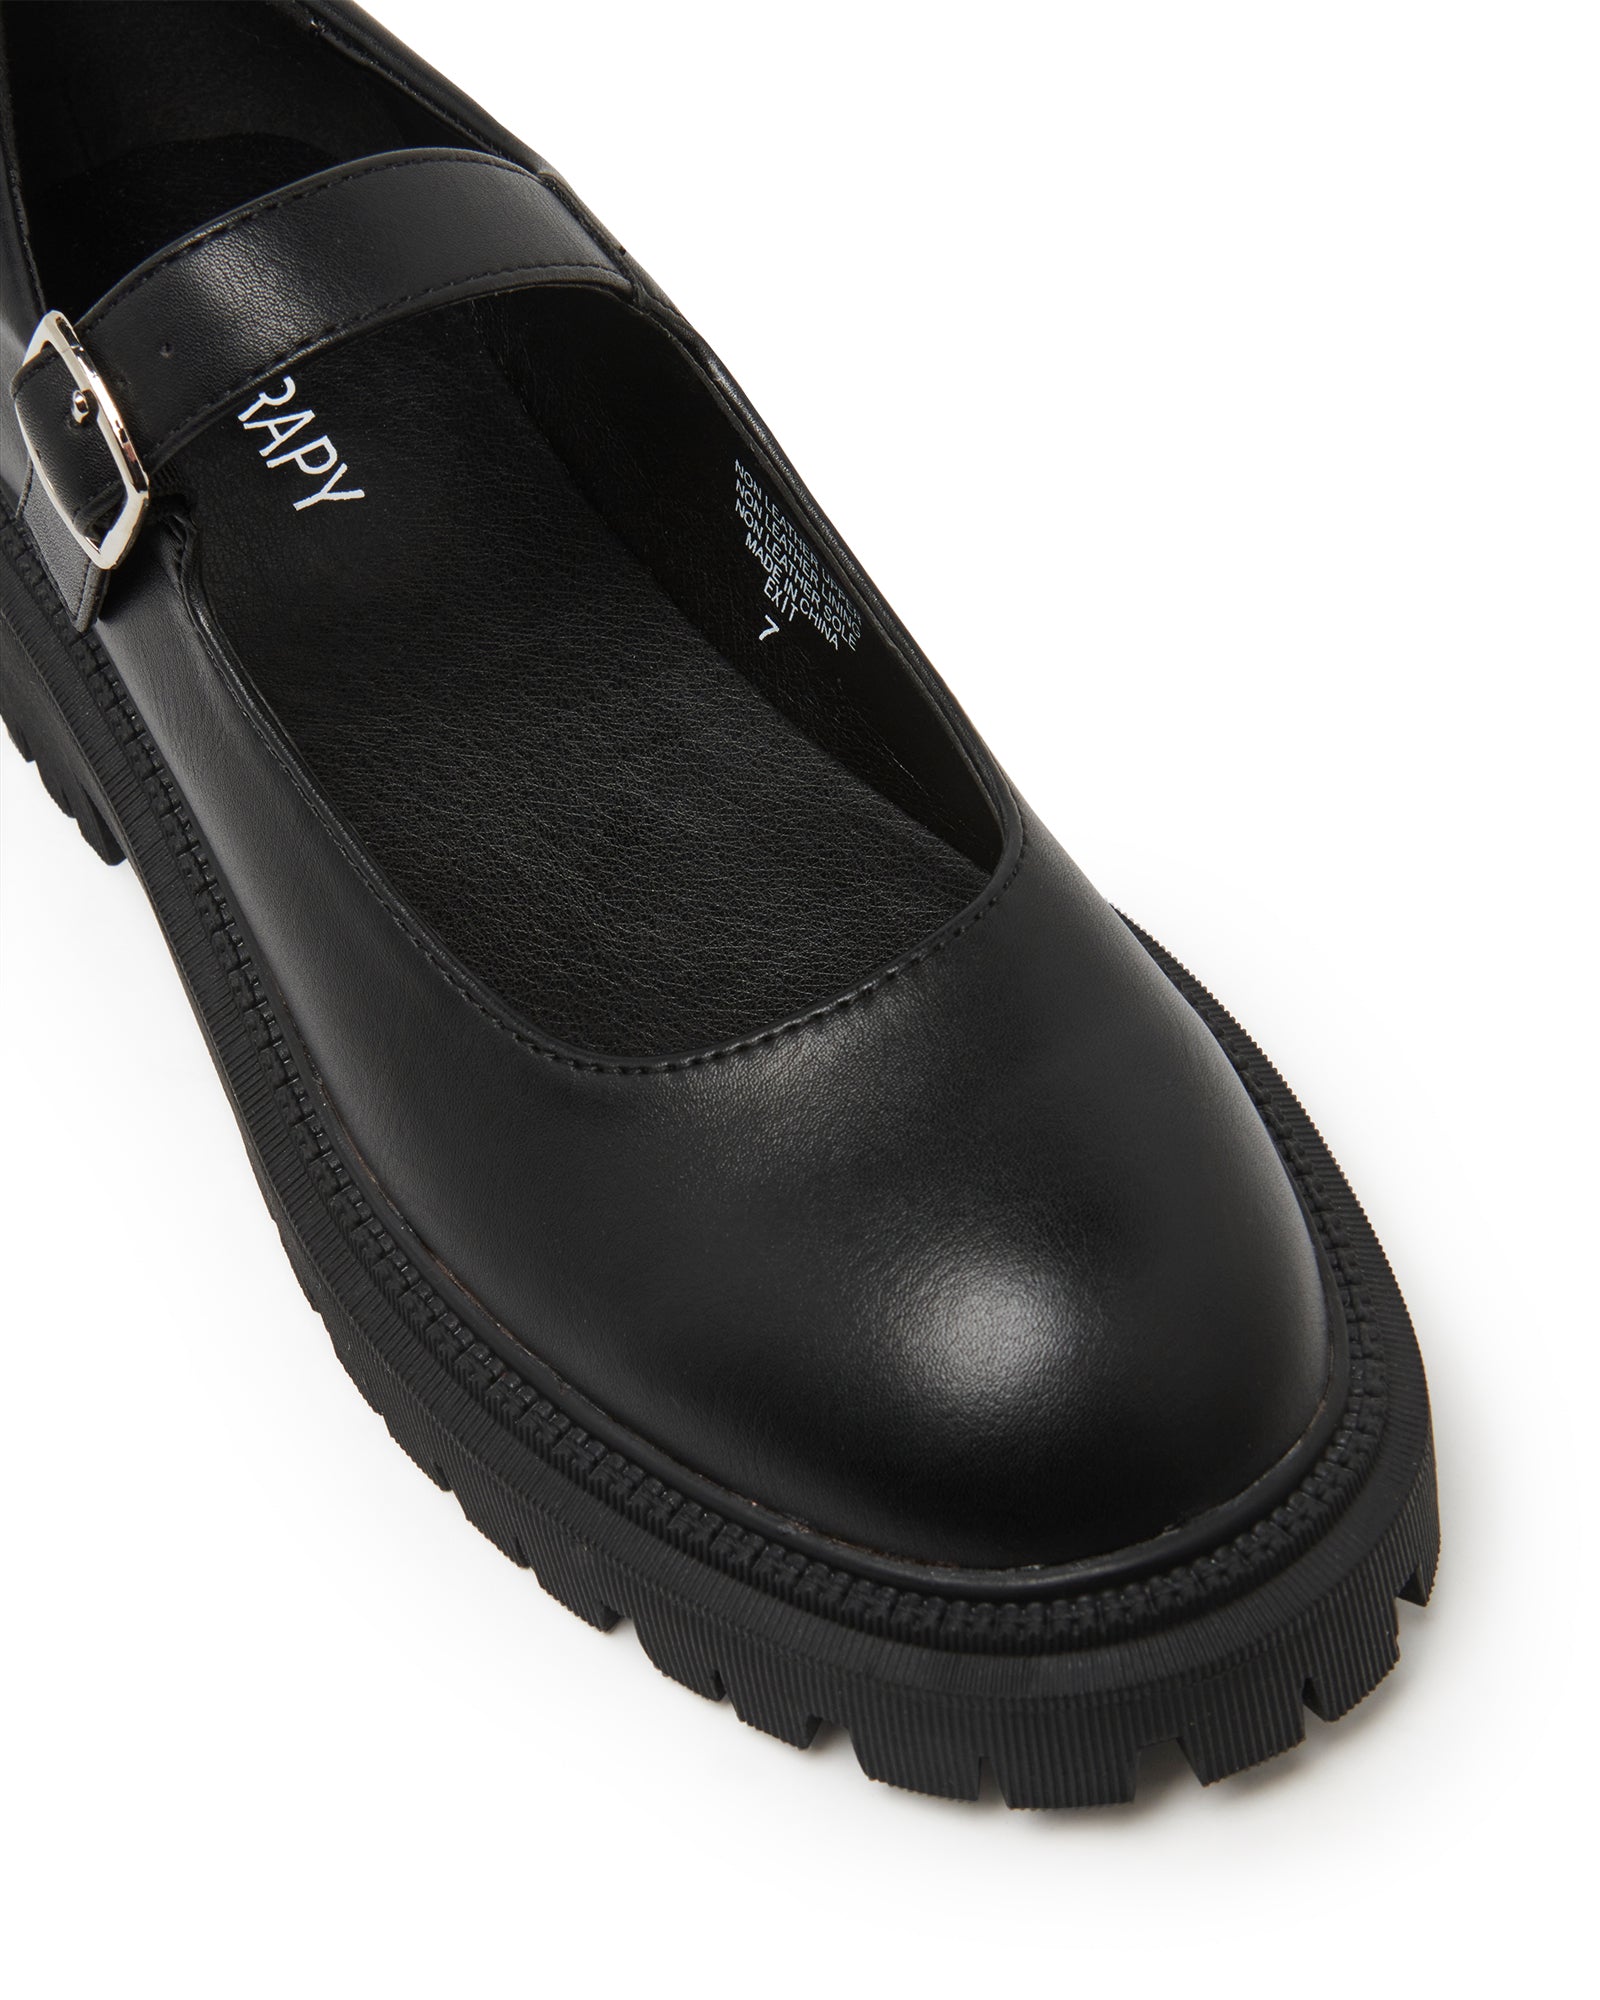 Therapy Shoes Exit Black Smooth | Women's Mary Jane | Chunky | Buckle